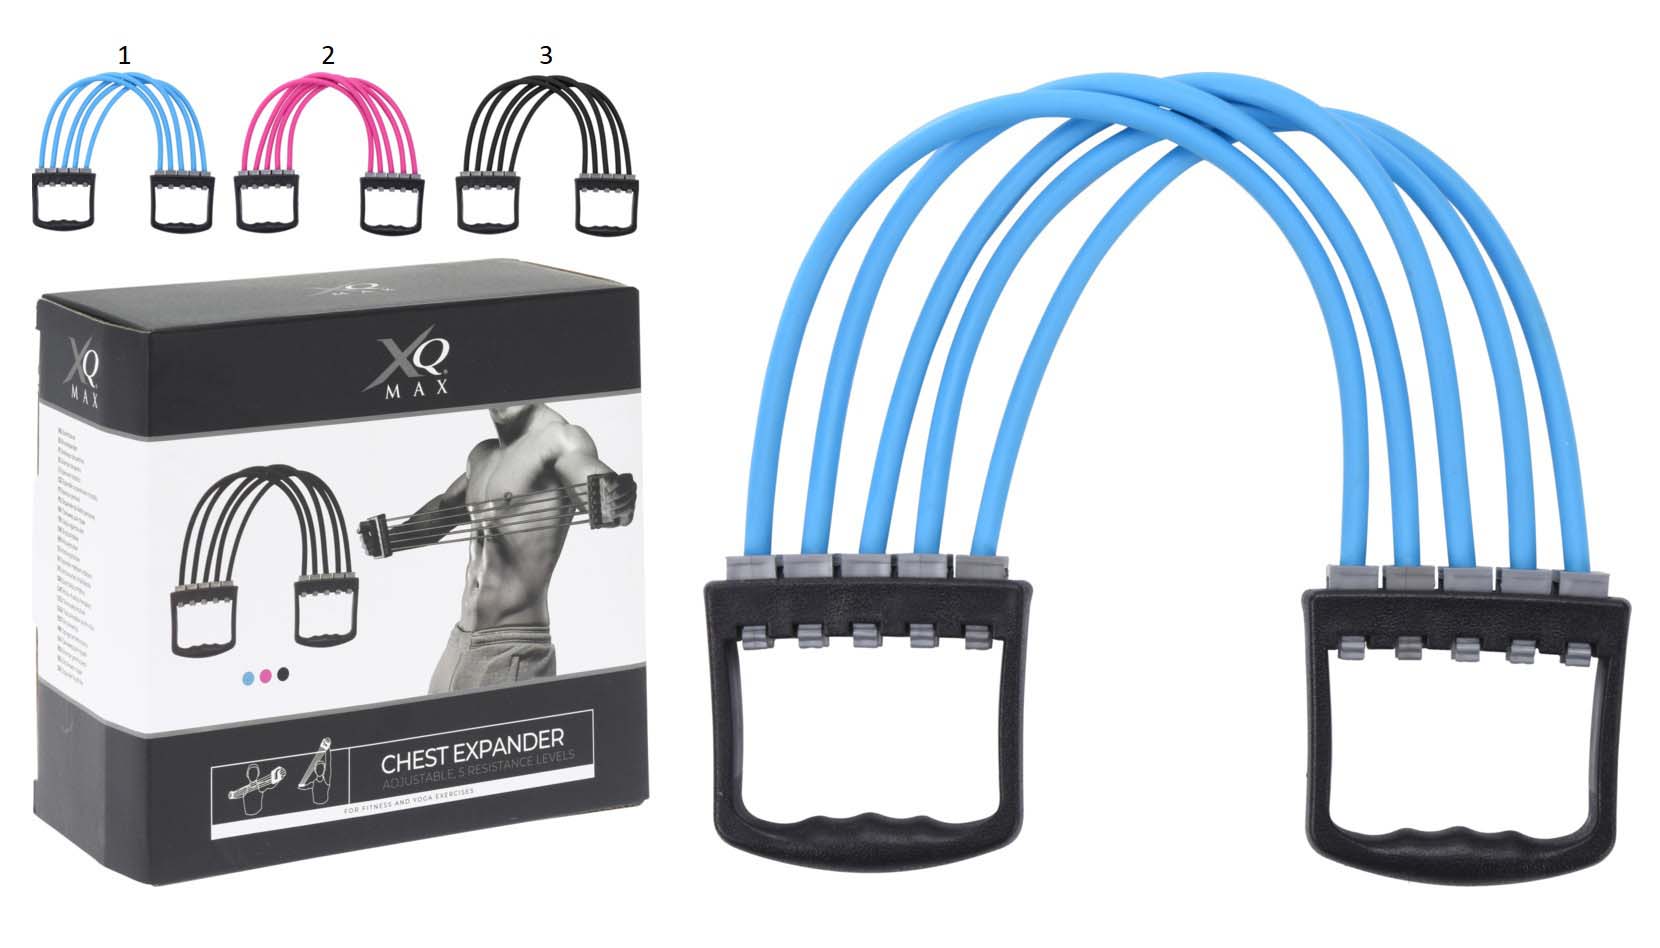 CHEST EXPANDER 3 ASSORTED COLORS